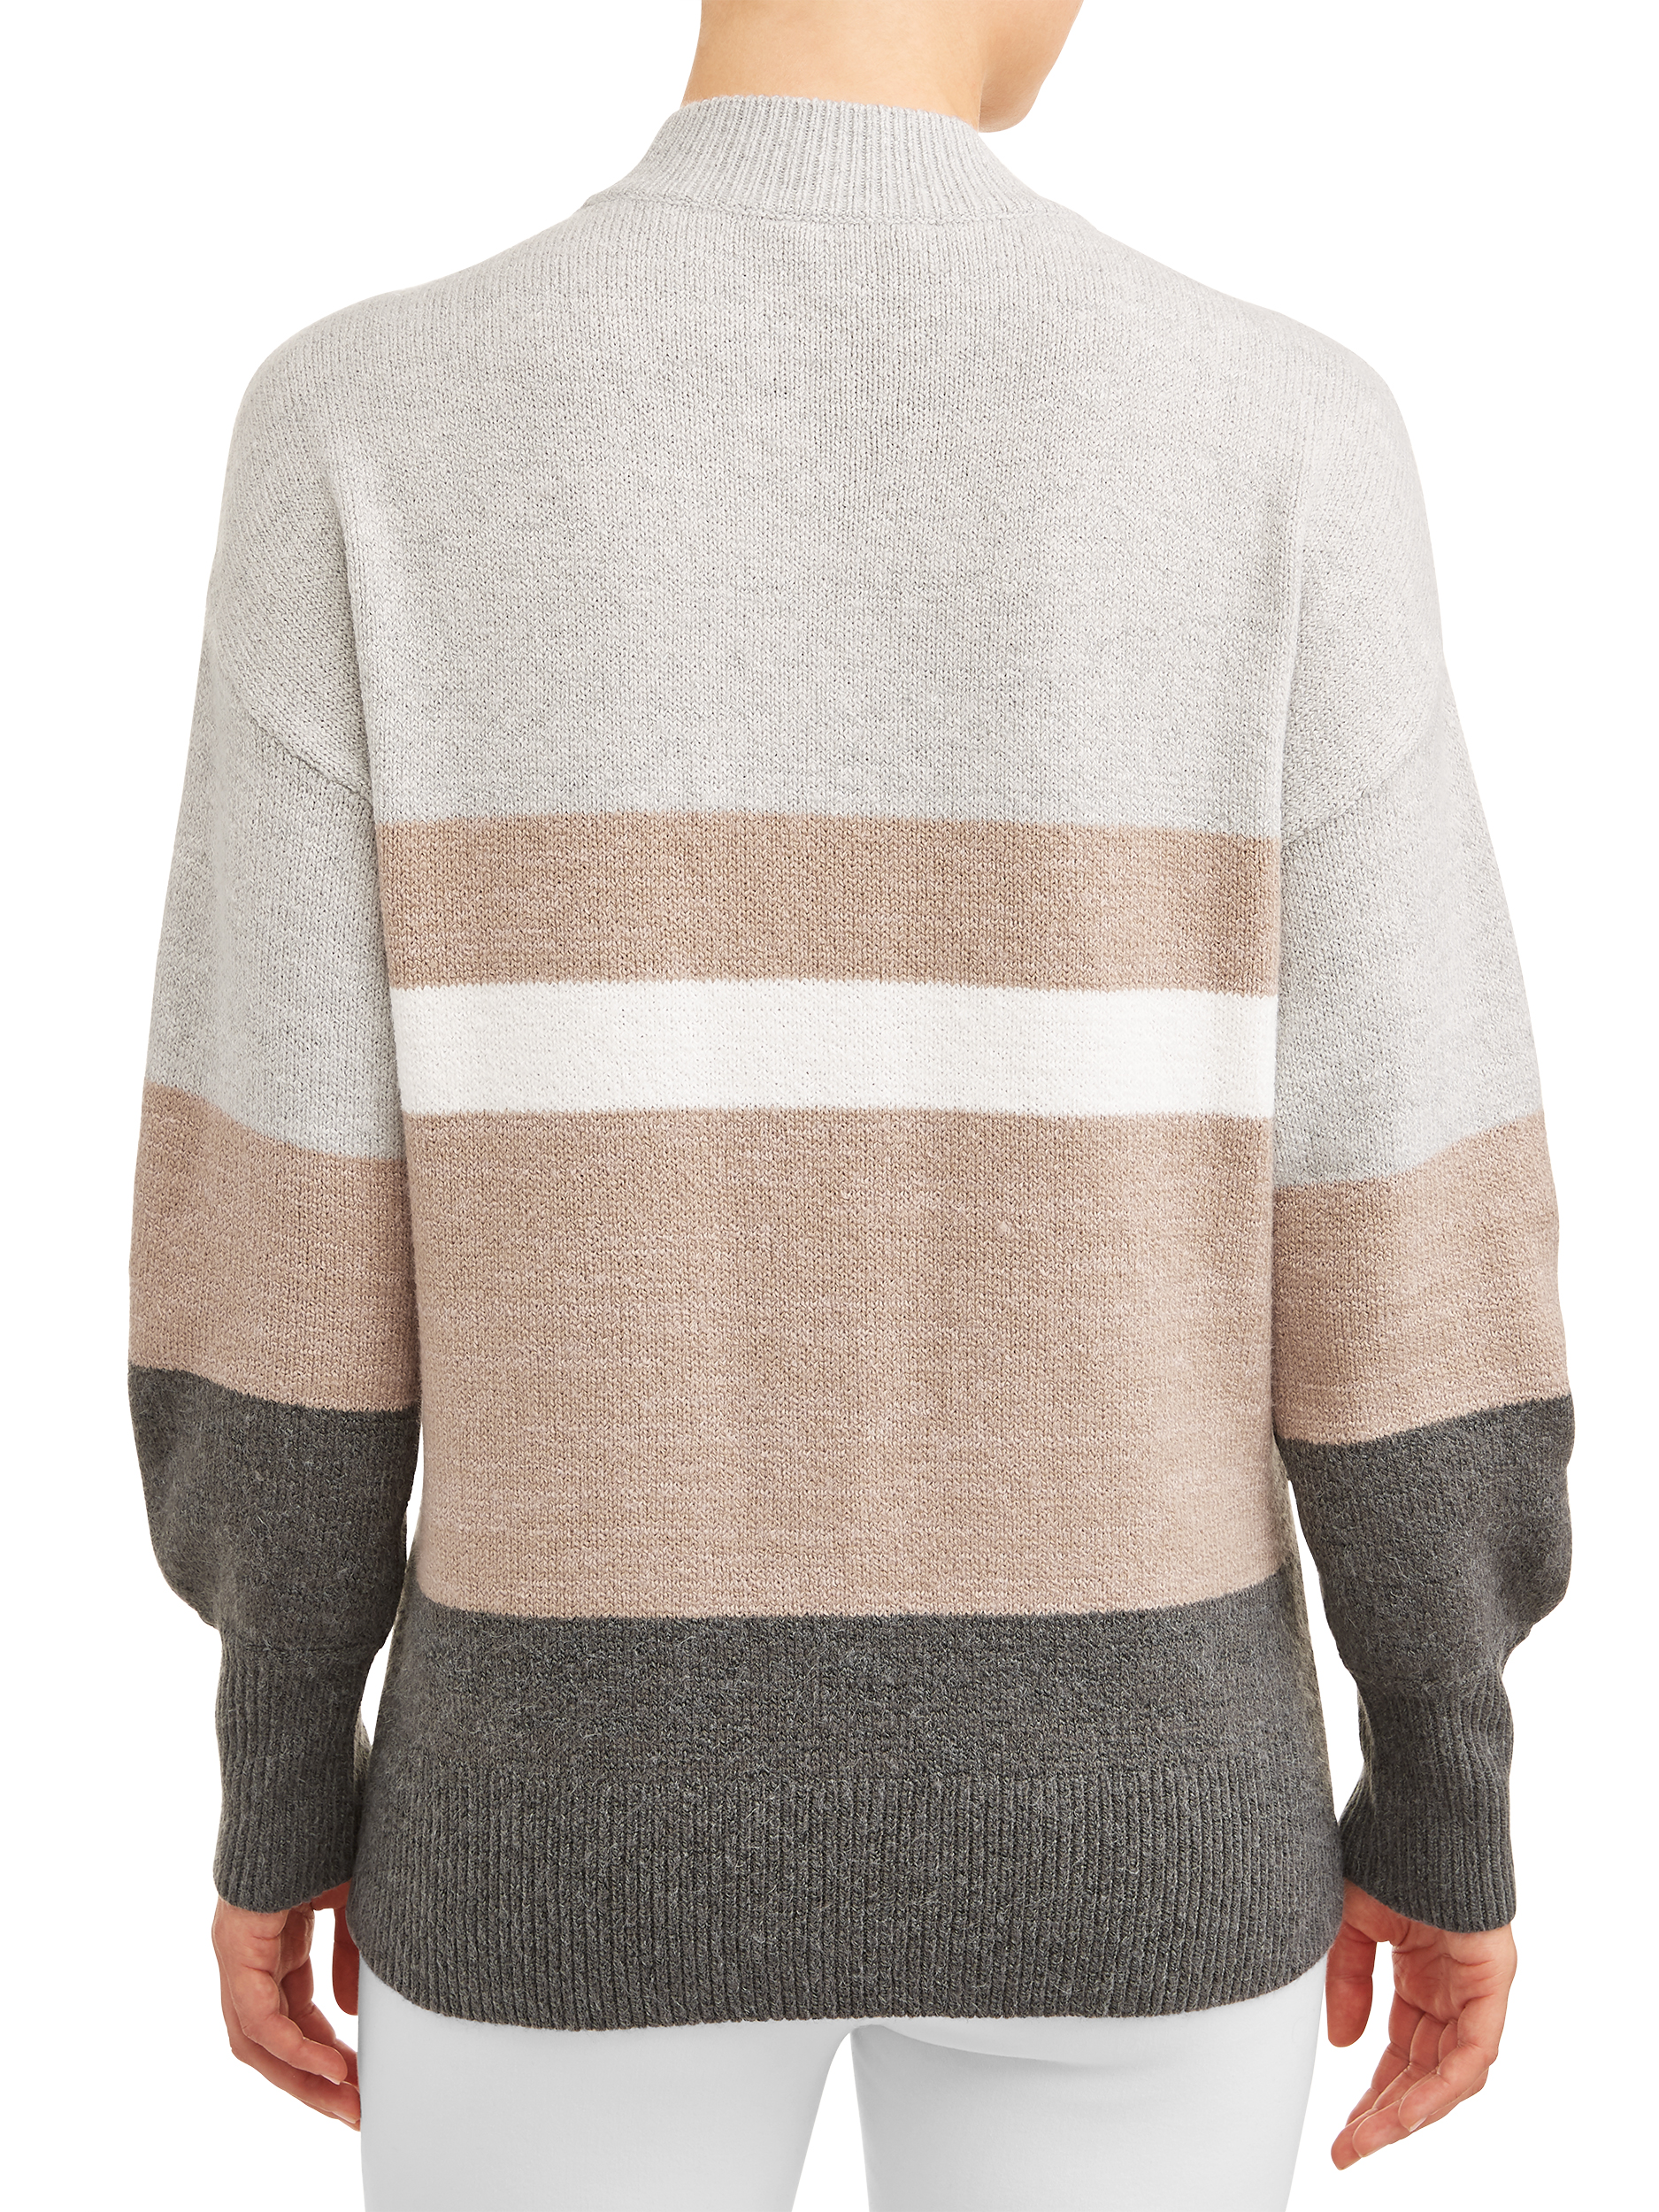 Time and Tru Women's Mock Neck Tunic Sweater - image 3 of 5